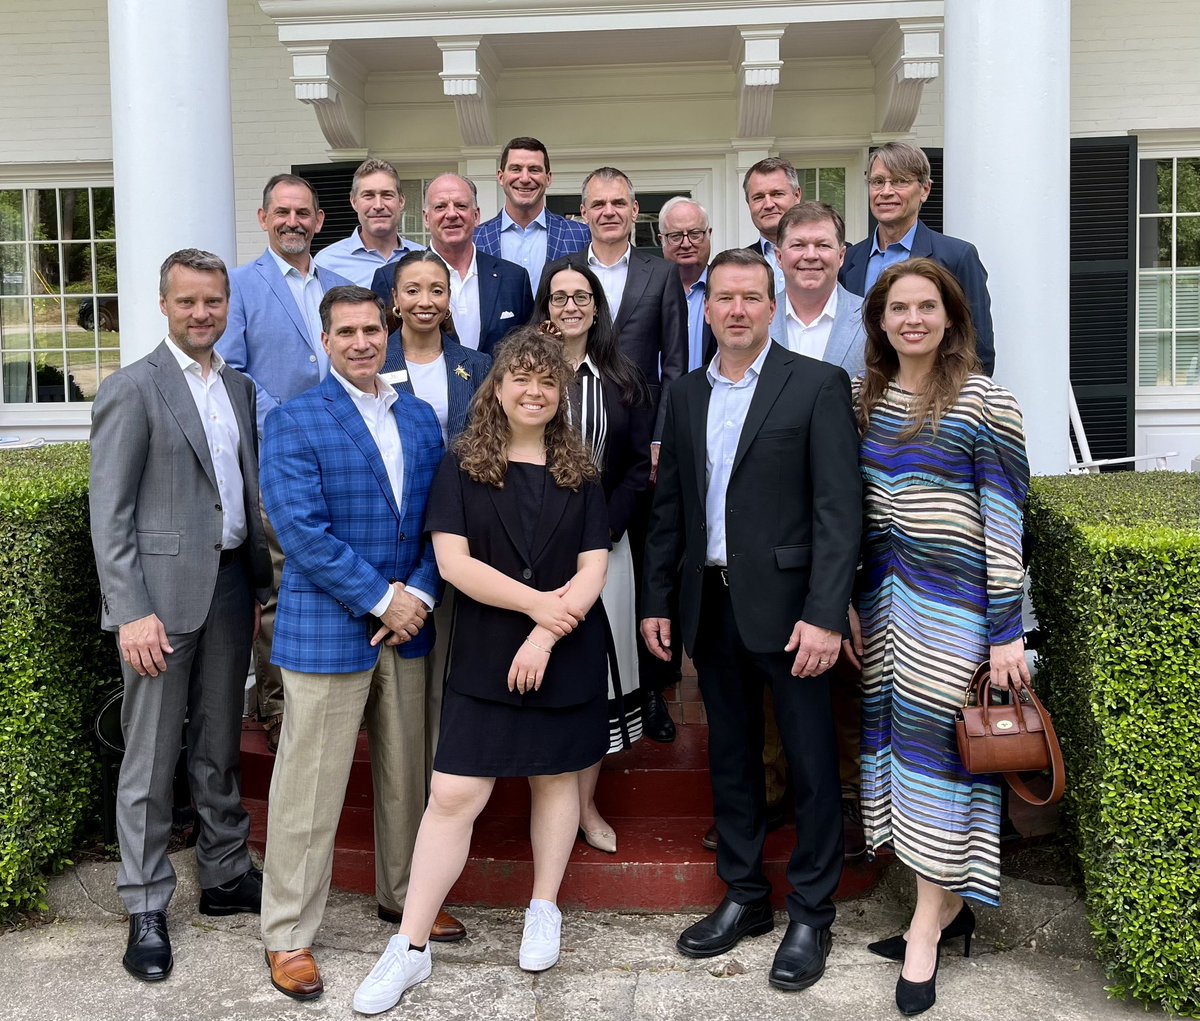 Thanks to Ambassador Cain for hosting excellent breakfast dialogue with prominent 🇩🇰 companies in North Carolina. Thrilled to collaborate on life sciences, energy efficiency & biosolutions! Together, advancing towards a greener future!